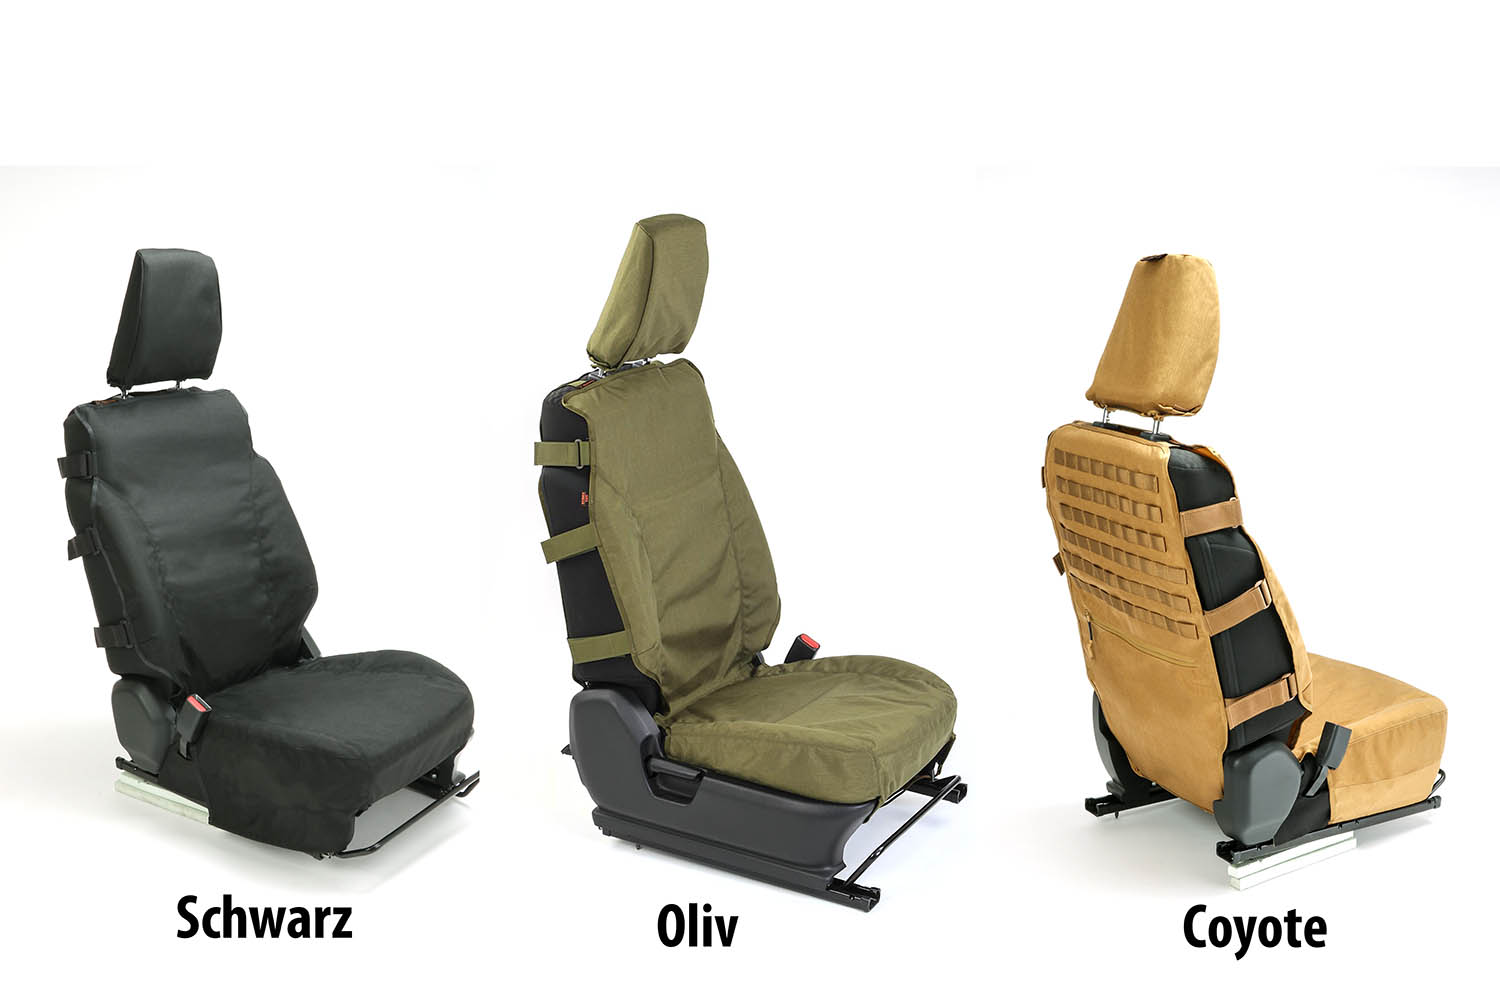 ▷ Seat cover for Suzuki Jimny I and II Type GJ / HJ - shop now!